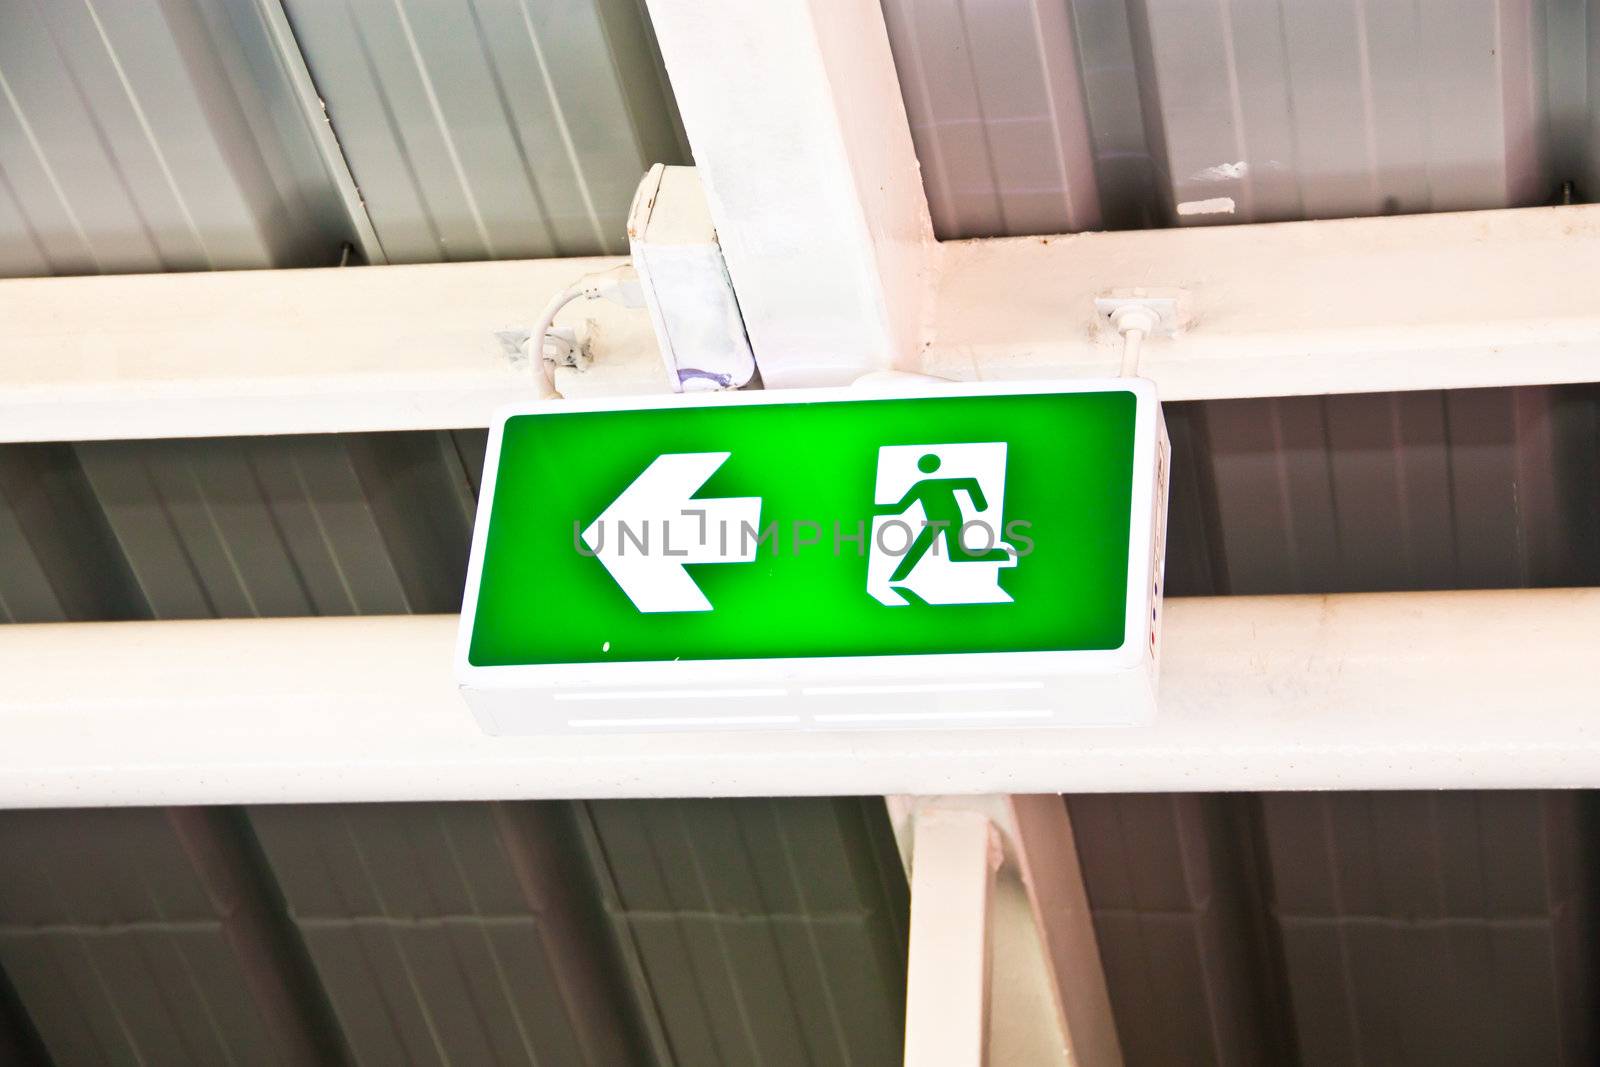 Fire exit signs in the green box. Used as a background.